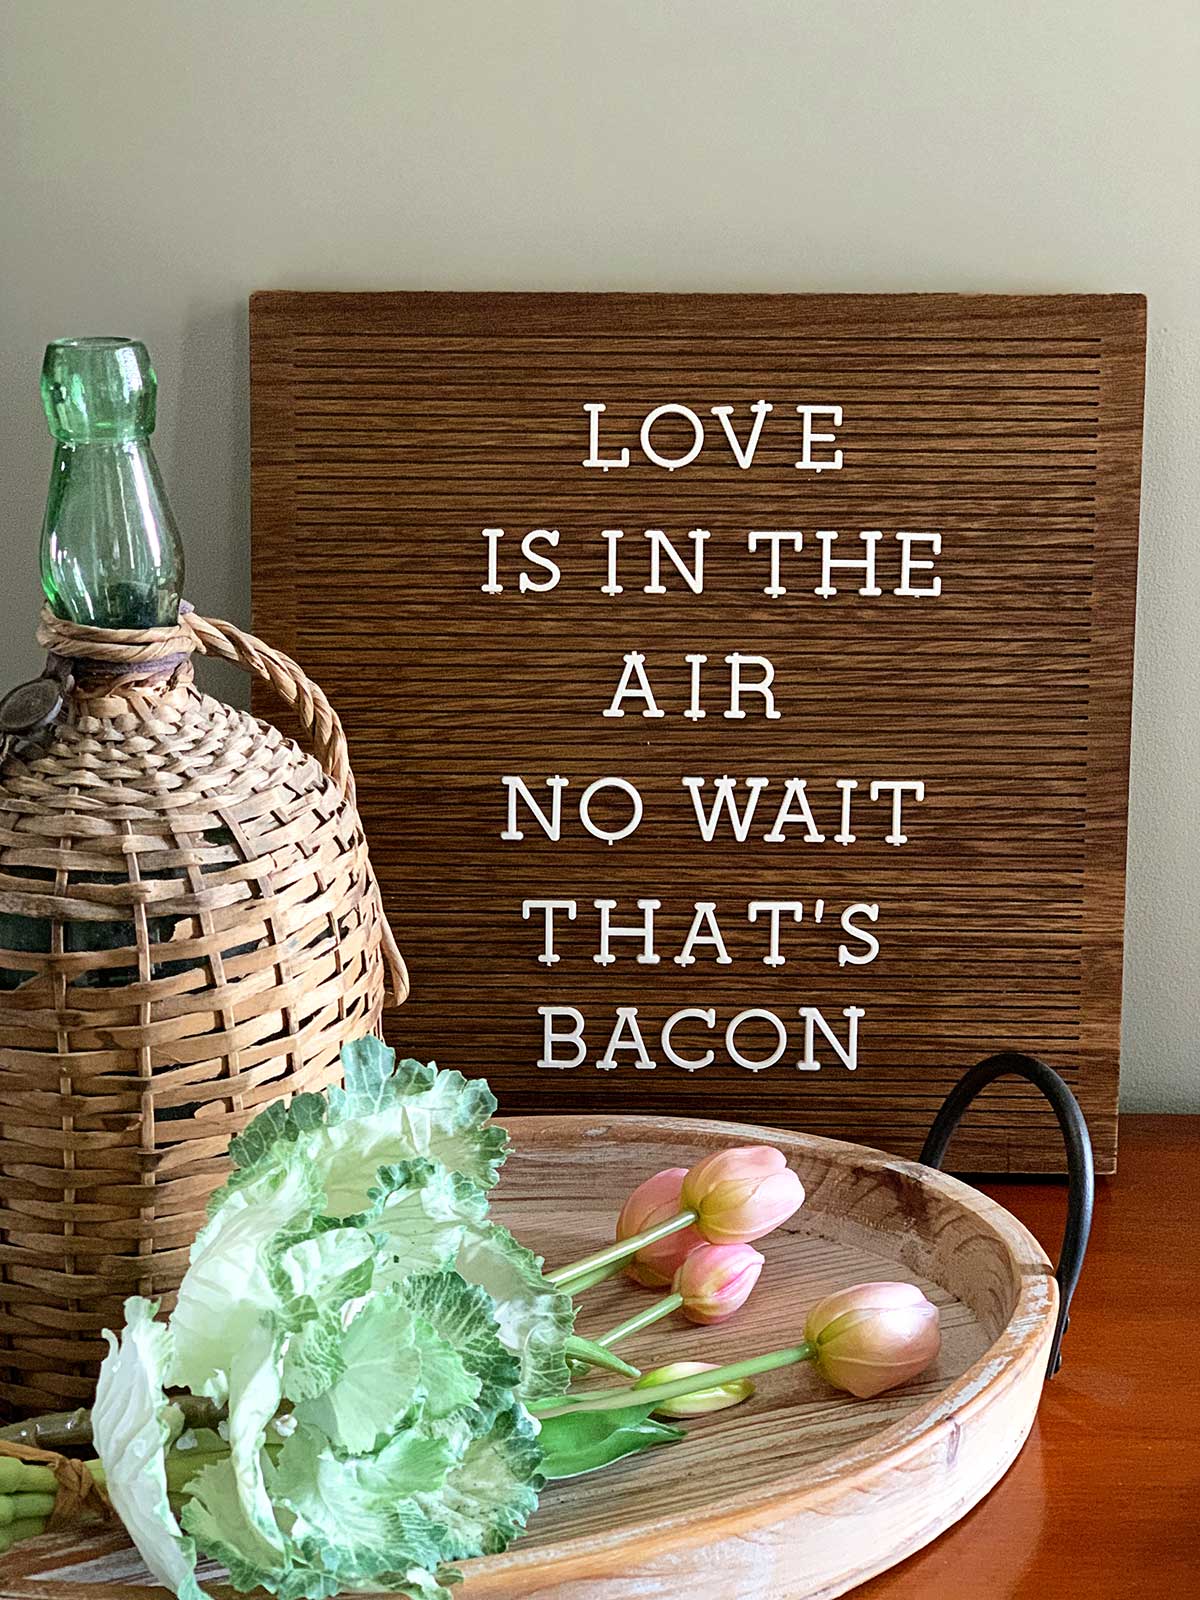 Letter board with the saying - Love is in the air, no wait that's bacon.